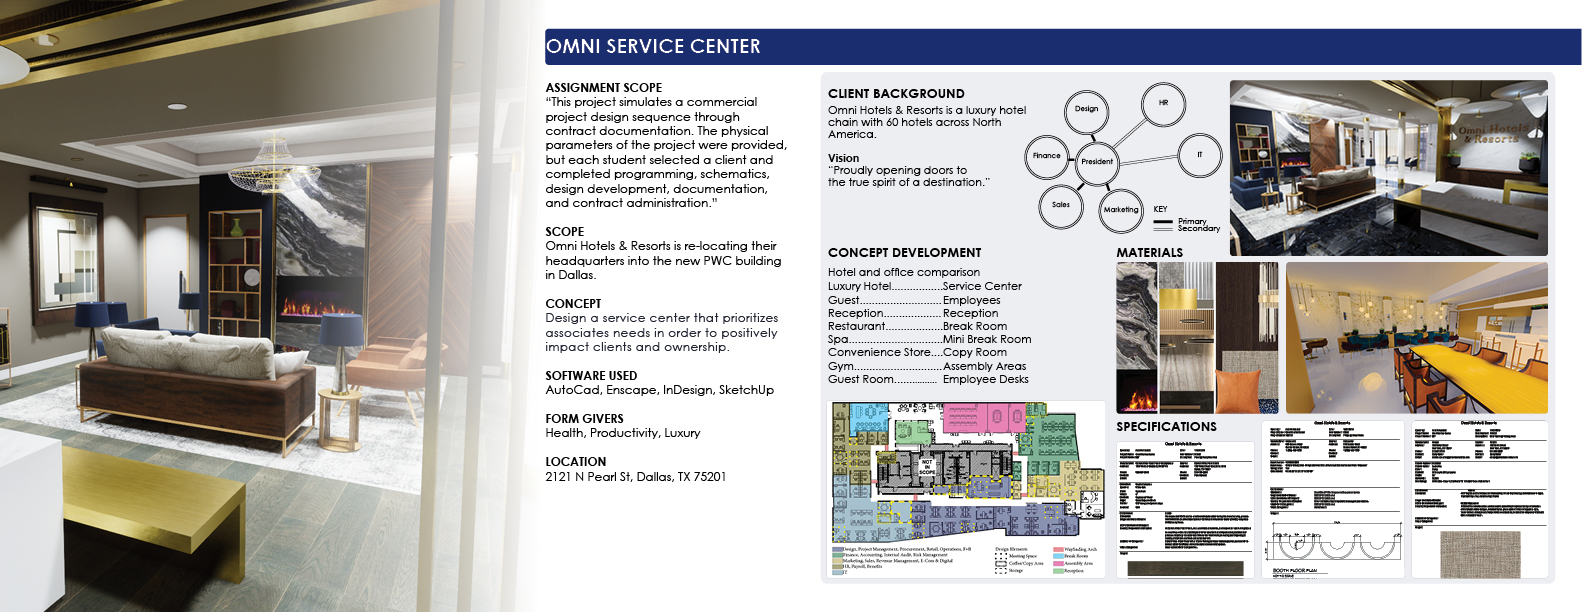 Omni hotles and resort's service center designs